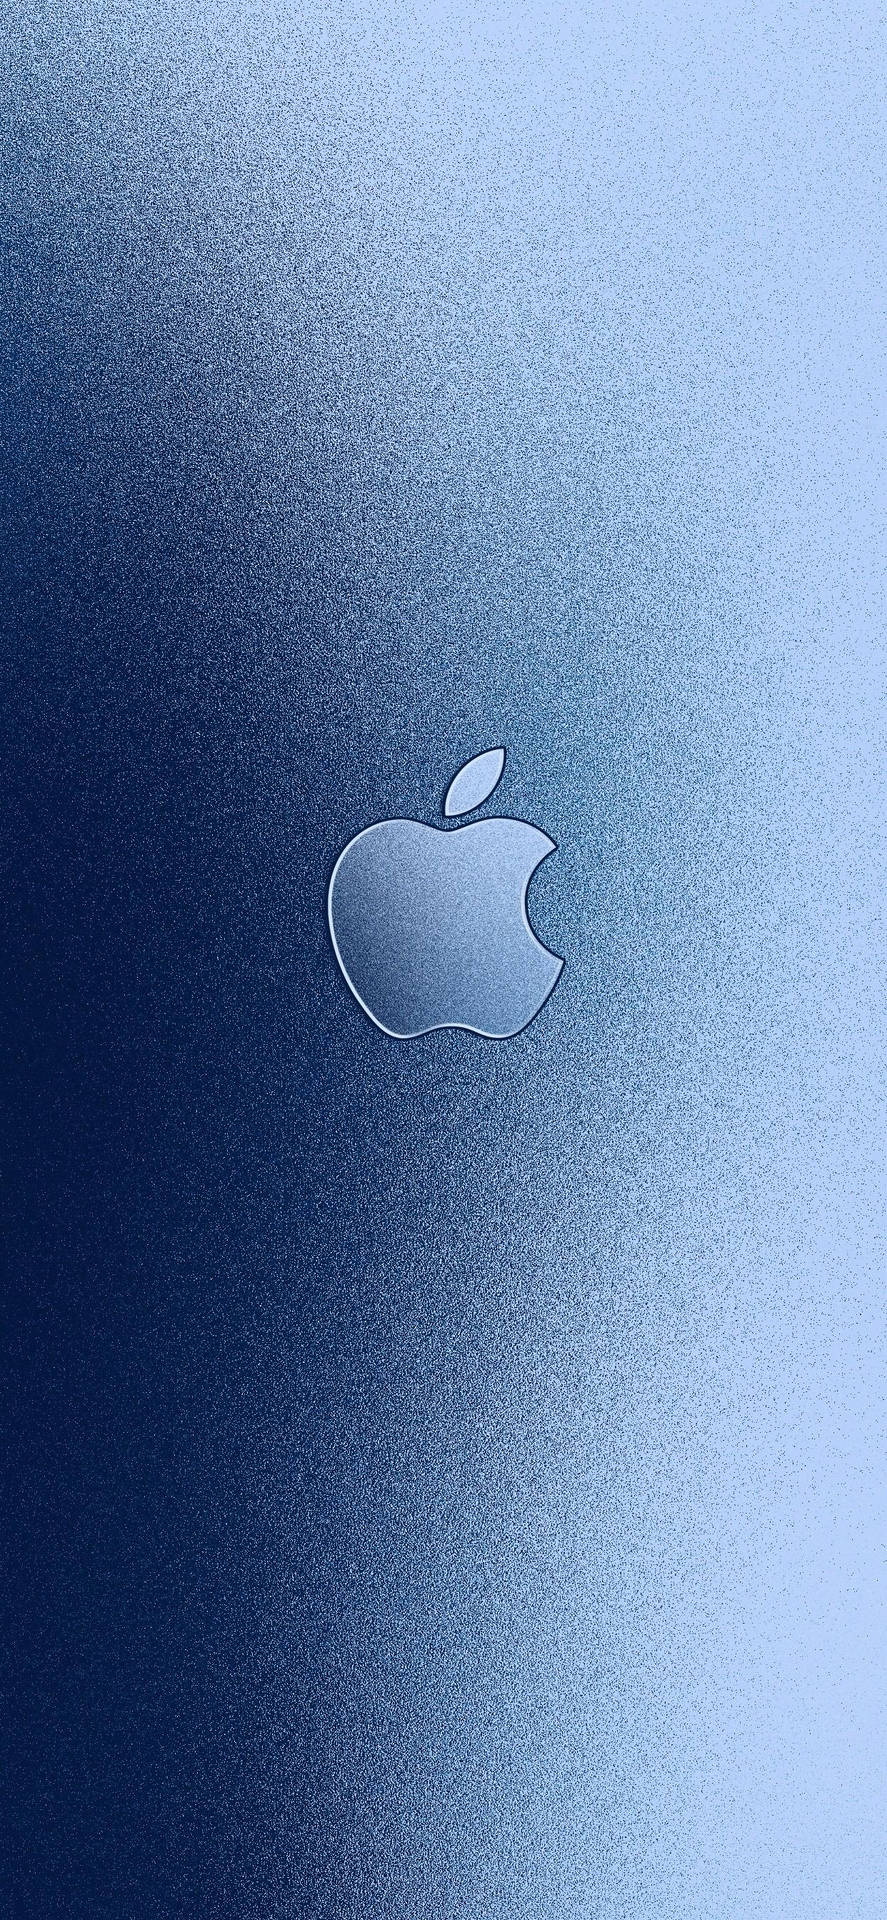 Silver Apple Logo Iphone Background